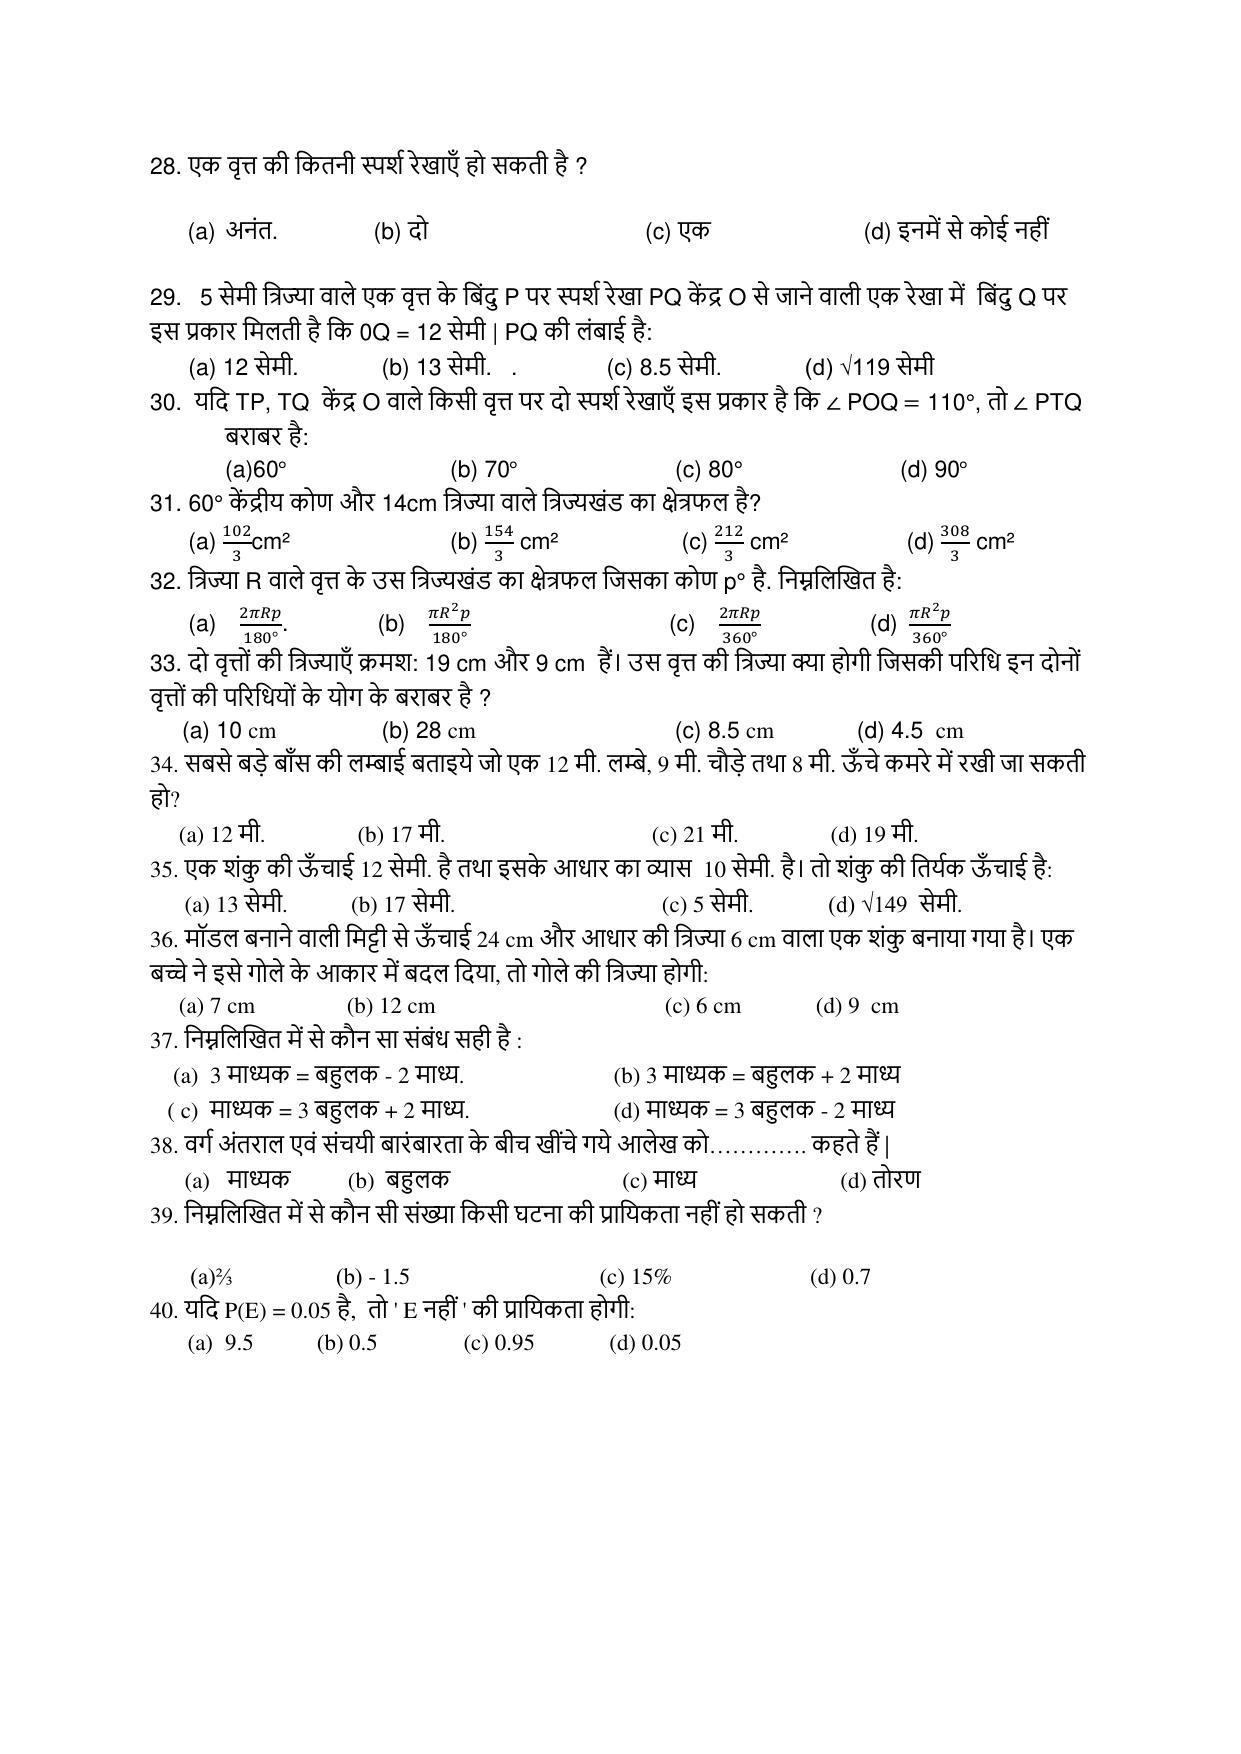 JAC Board Class 10th Model Papers - Page 15